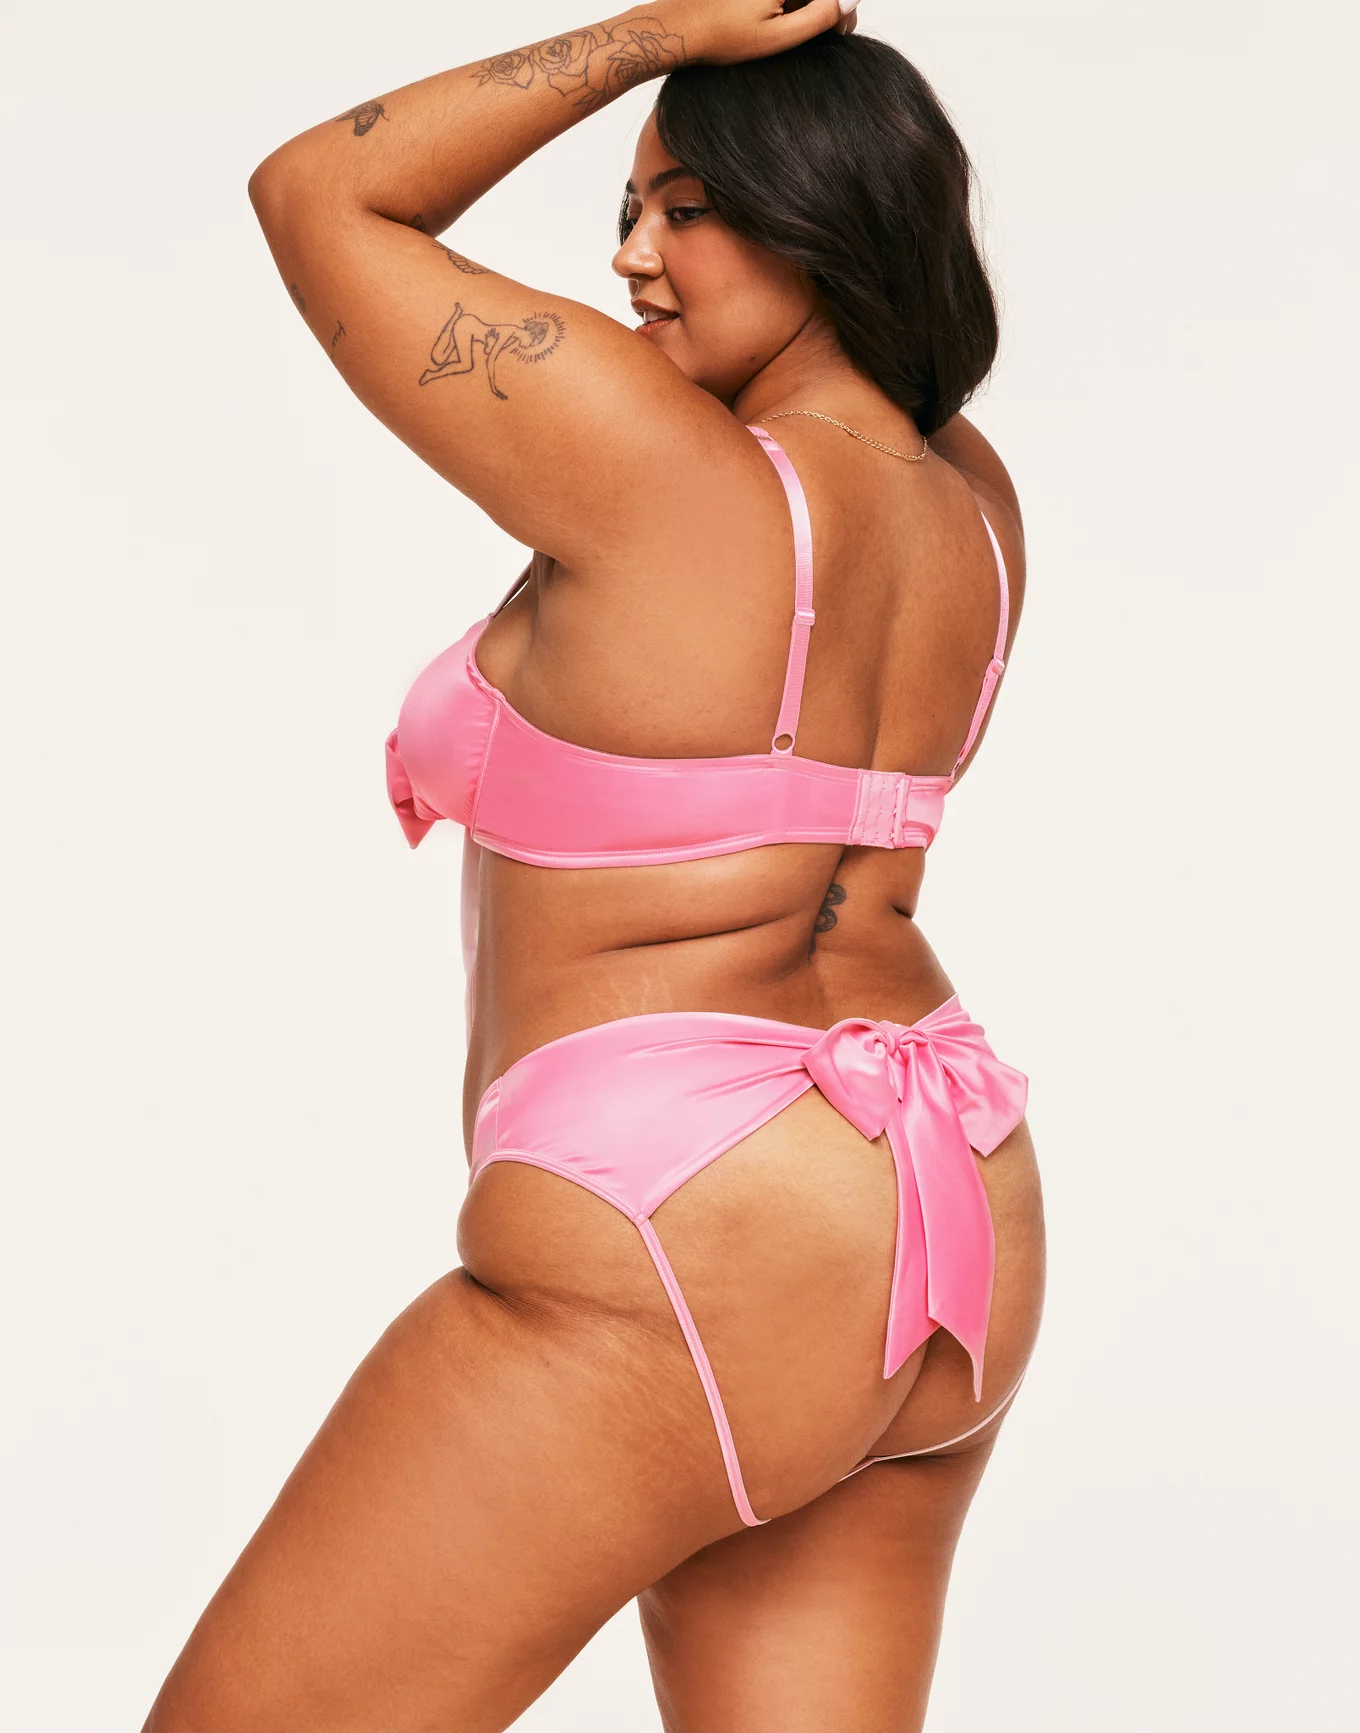 Adore Me: NEW Just In! The Gynger Bra & Panty Set—in PINK. 🎀